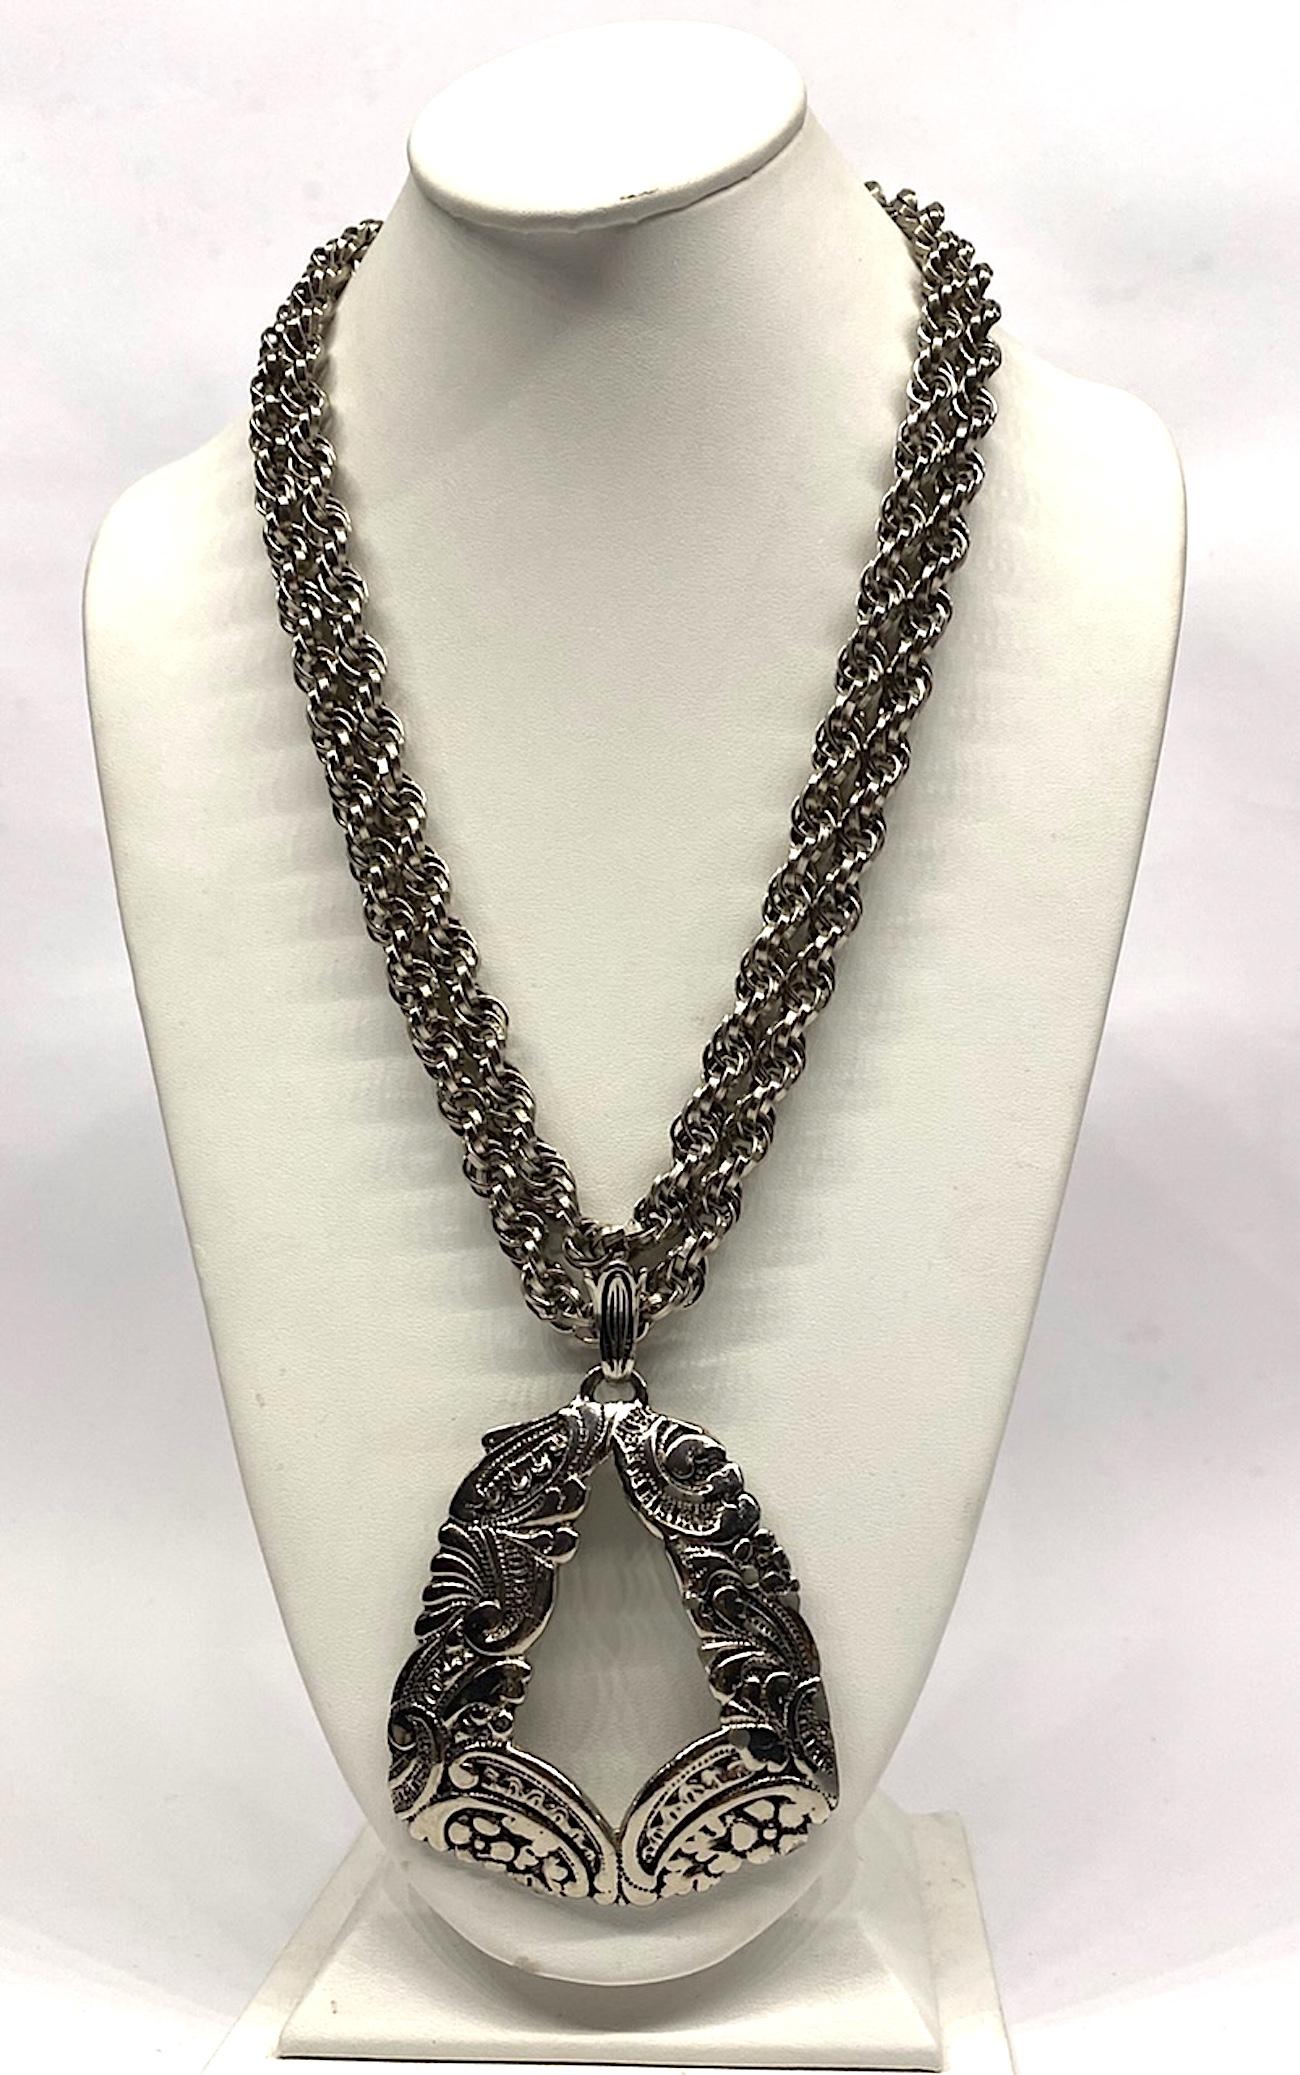 A vintage Lucien Pieccard 1970s statement pendant necklace. The two rope chains and pendant are rhodium plate in an antique silver color. The two rope link strands are .38 of an inch in diameter and meet at a satin silver color round push pin box